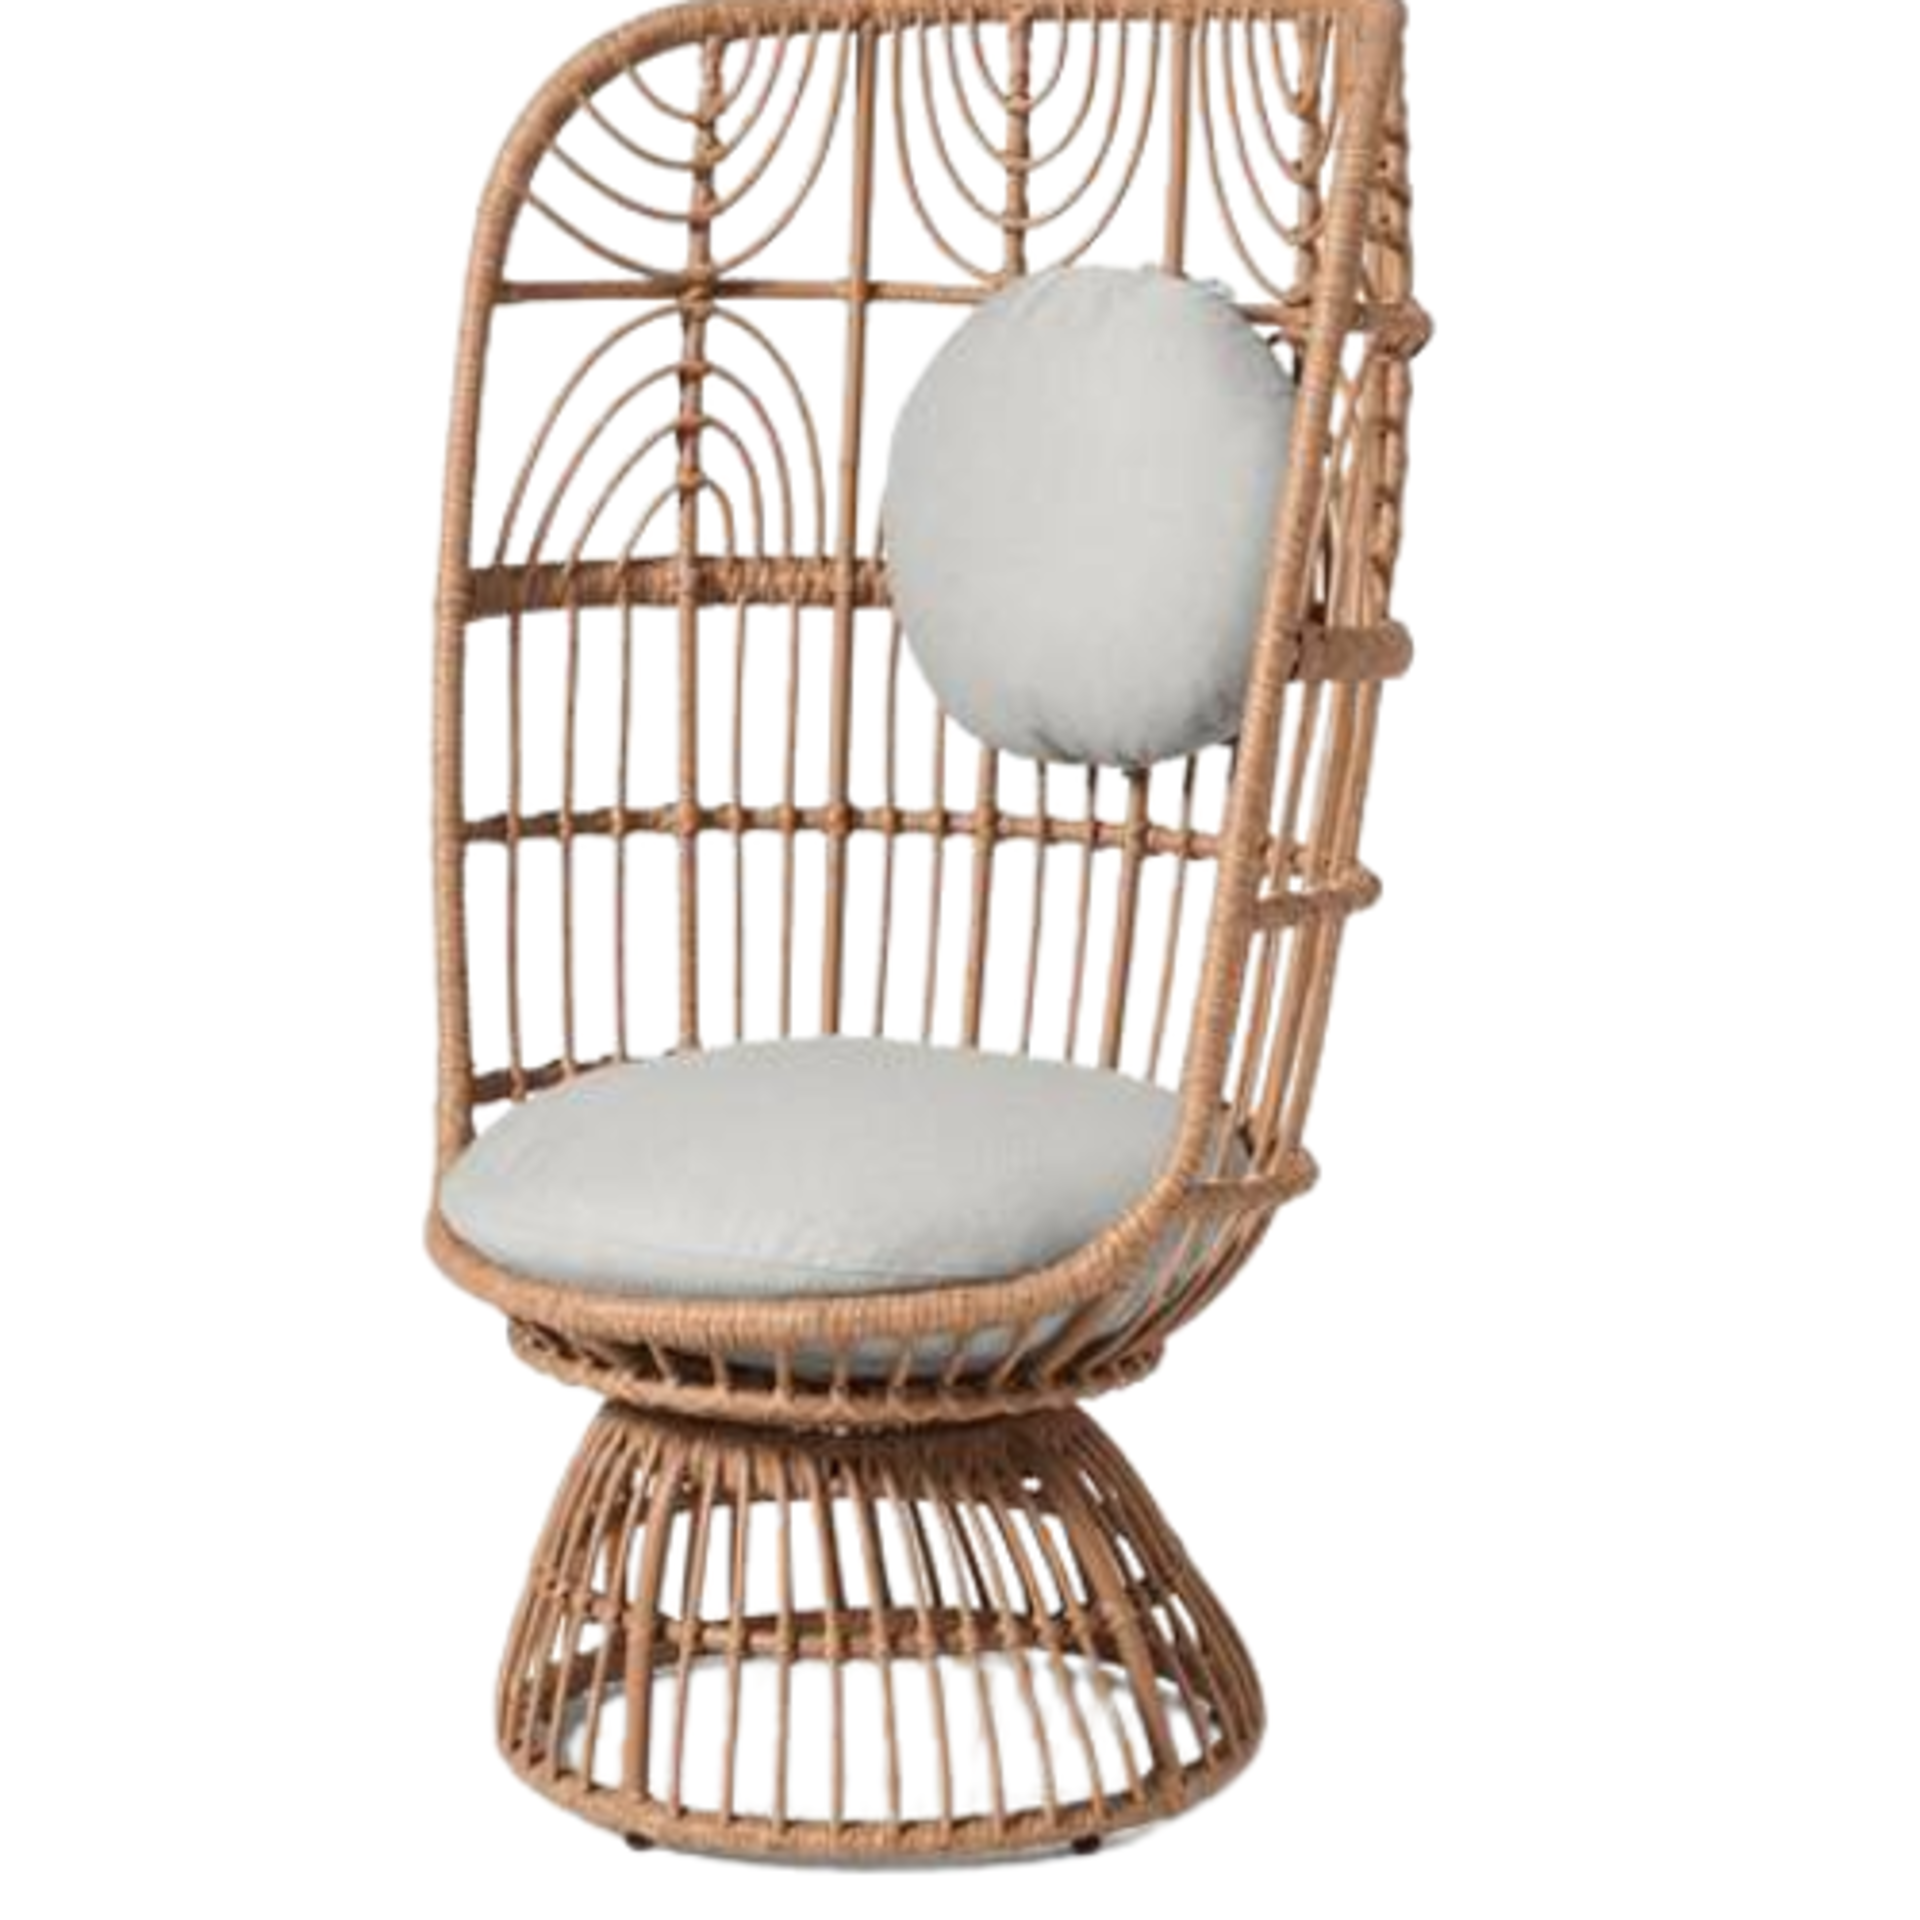 BRAND NEW Made.Com Nairi Garden Accent Chair. RRP £499.00. - Image 2 of 3